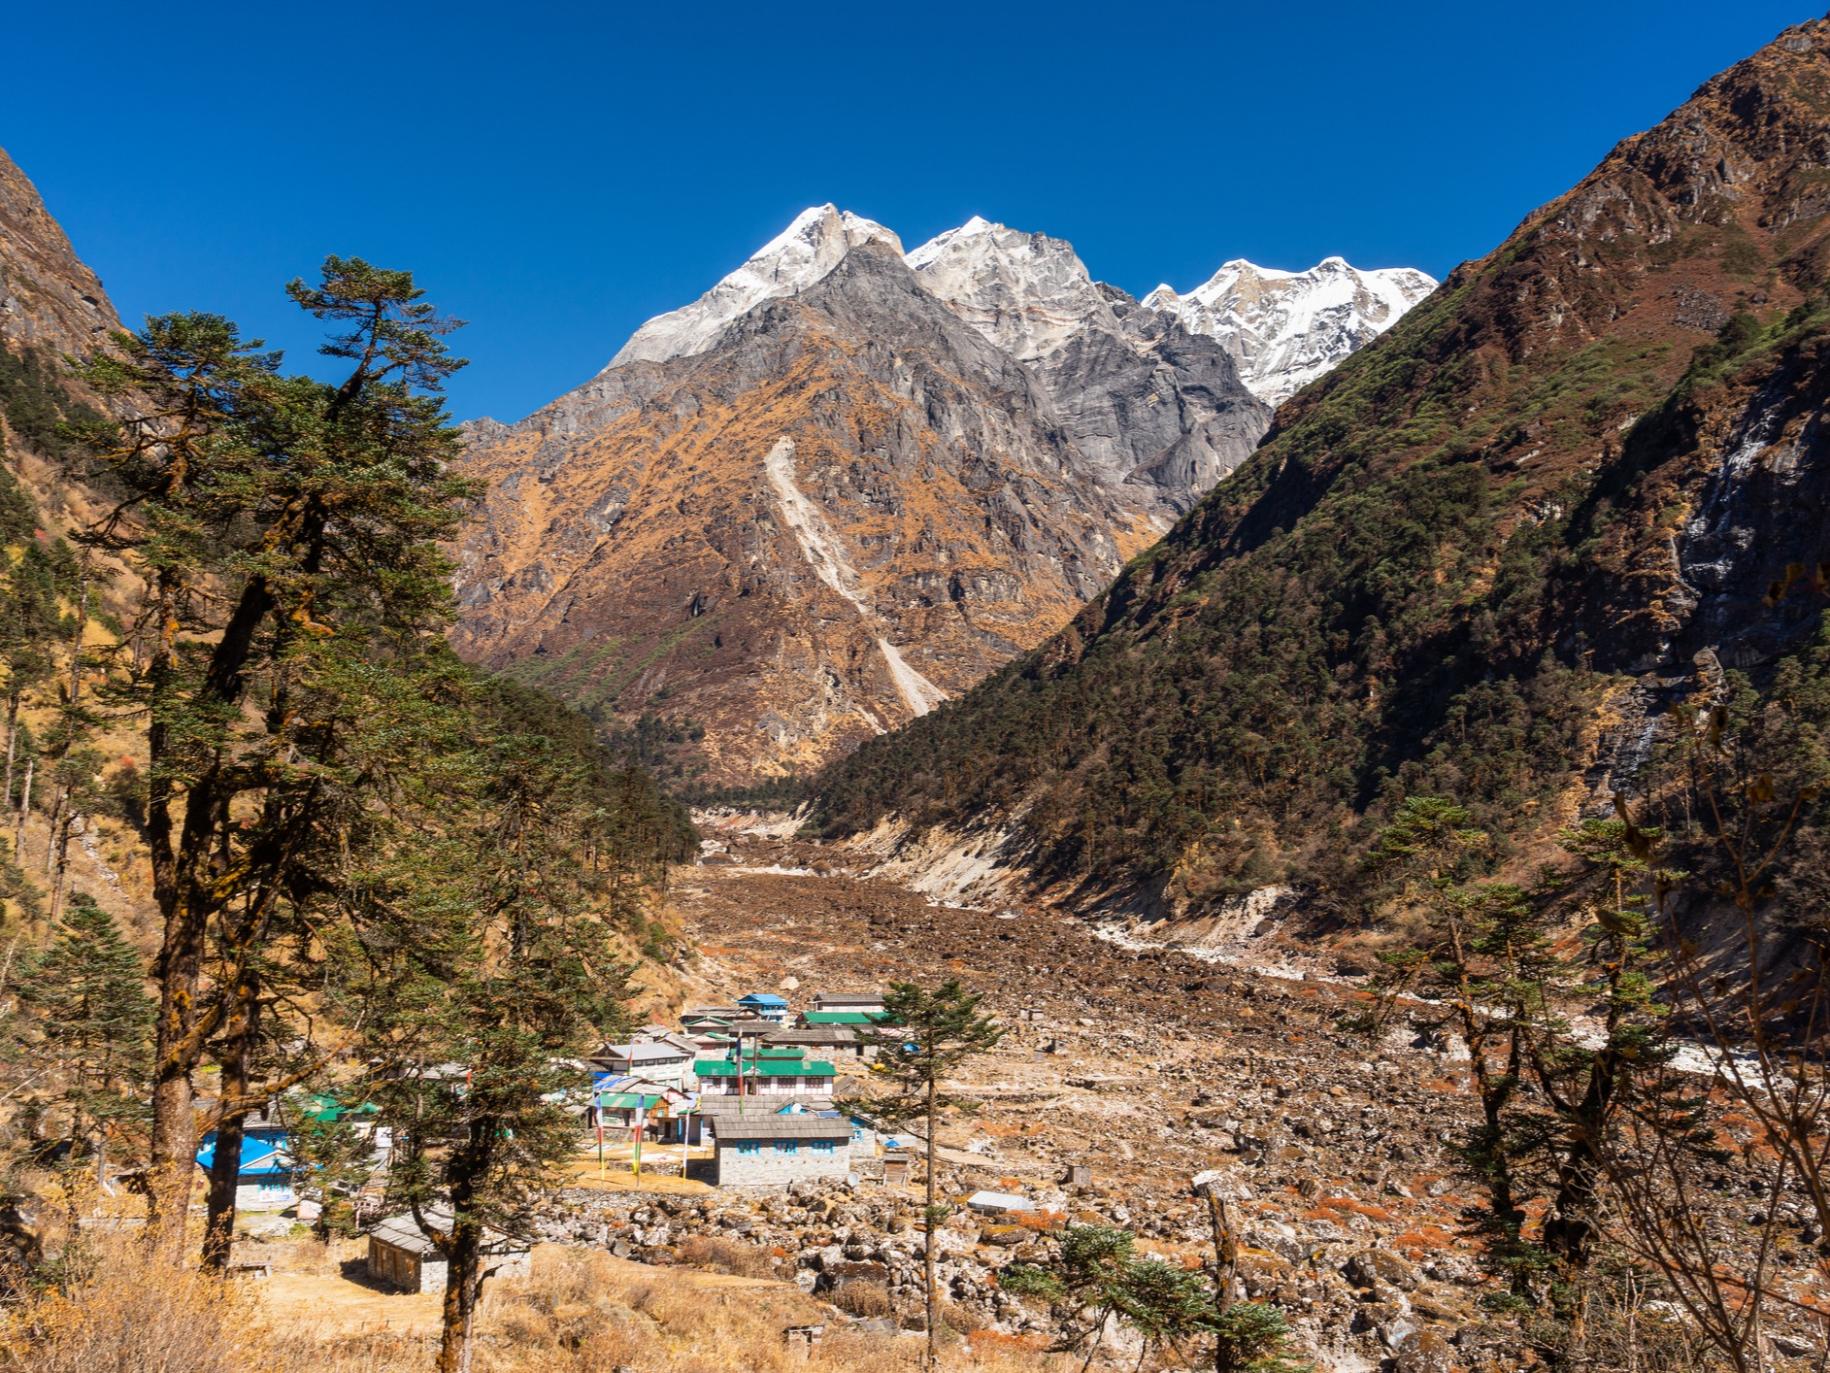 Khothe village, surrounded by rocky peaks. Photo: Getty.